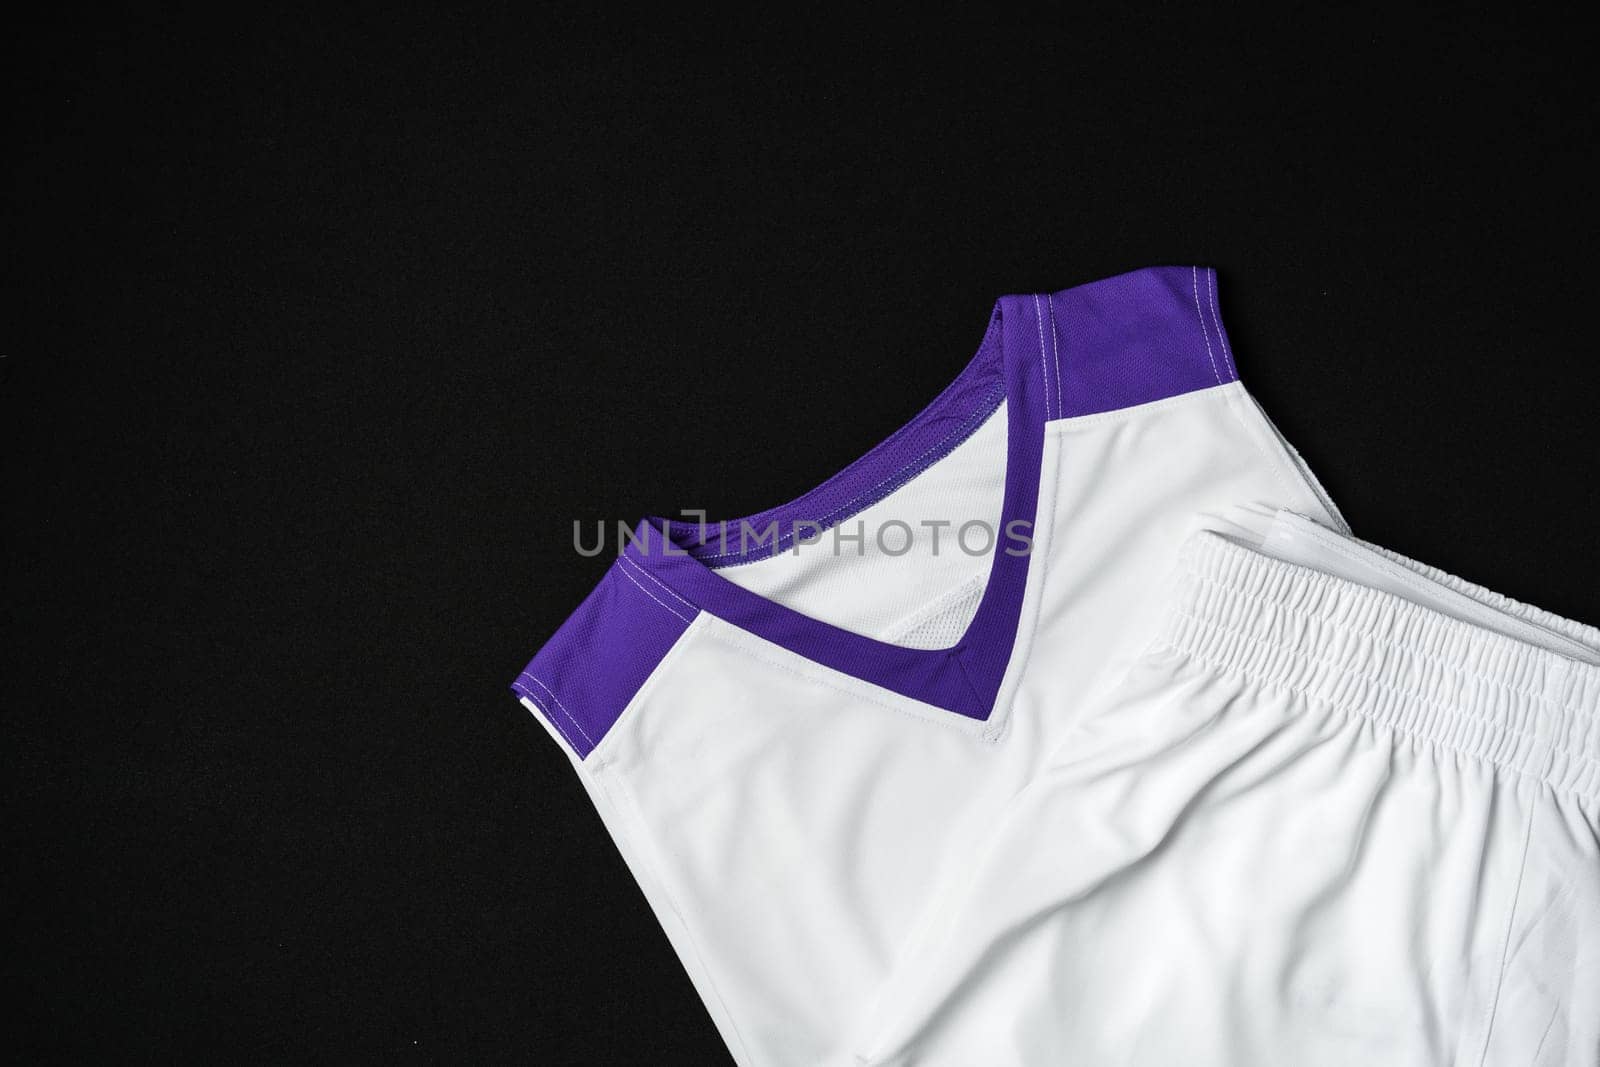 A close-up view of a white and purple athletic tank top neatly arranged on a dark background, highlighting its sporty design and contrasting vibrant trim. The fabric texture suggests a focus on breathability and performance, suitable for sportswear.